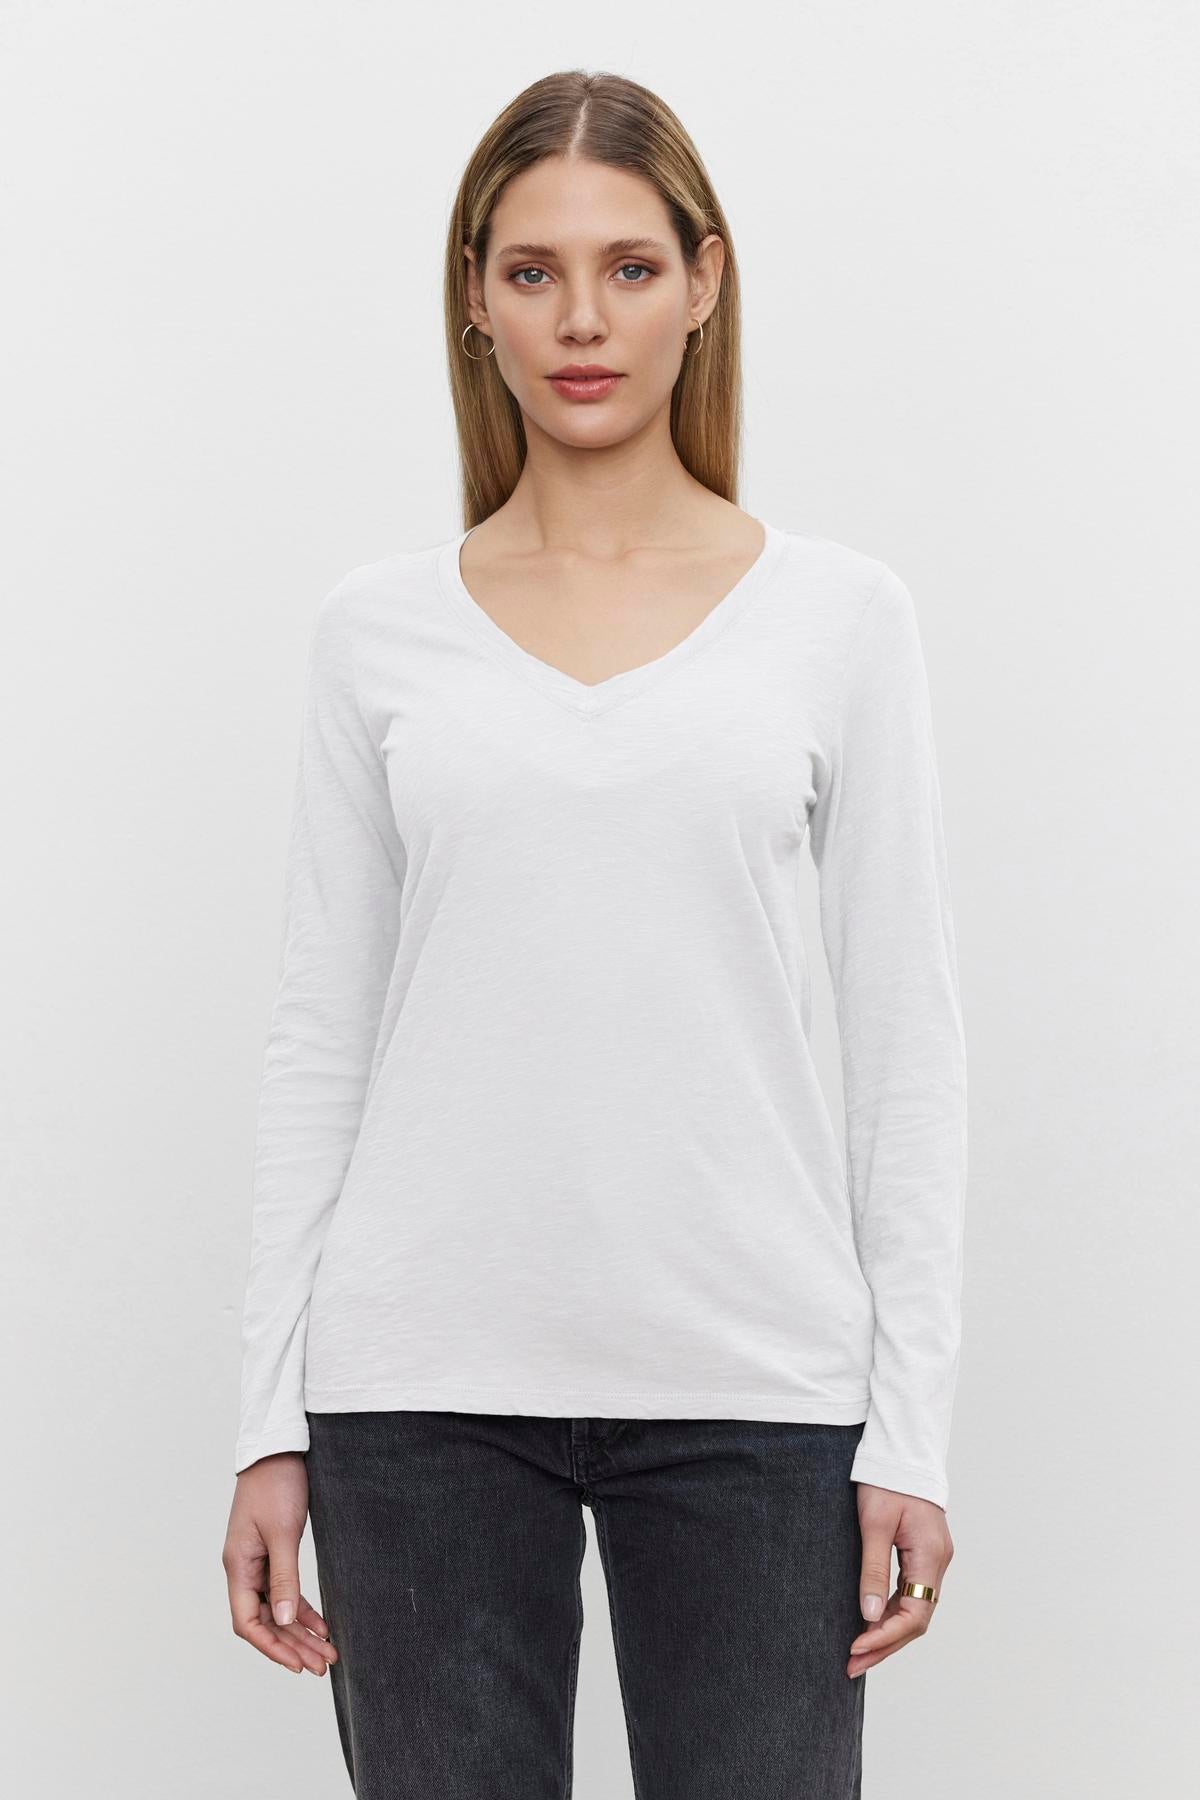 A person with long hair wearing a white BLAIRE TEE long-sleeve shirt made from textured cotton slub by Velvet by Graham & Spencer and dark jeans stands against a plain white background.-37377300070593